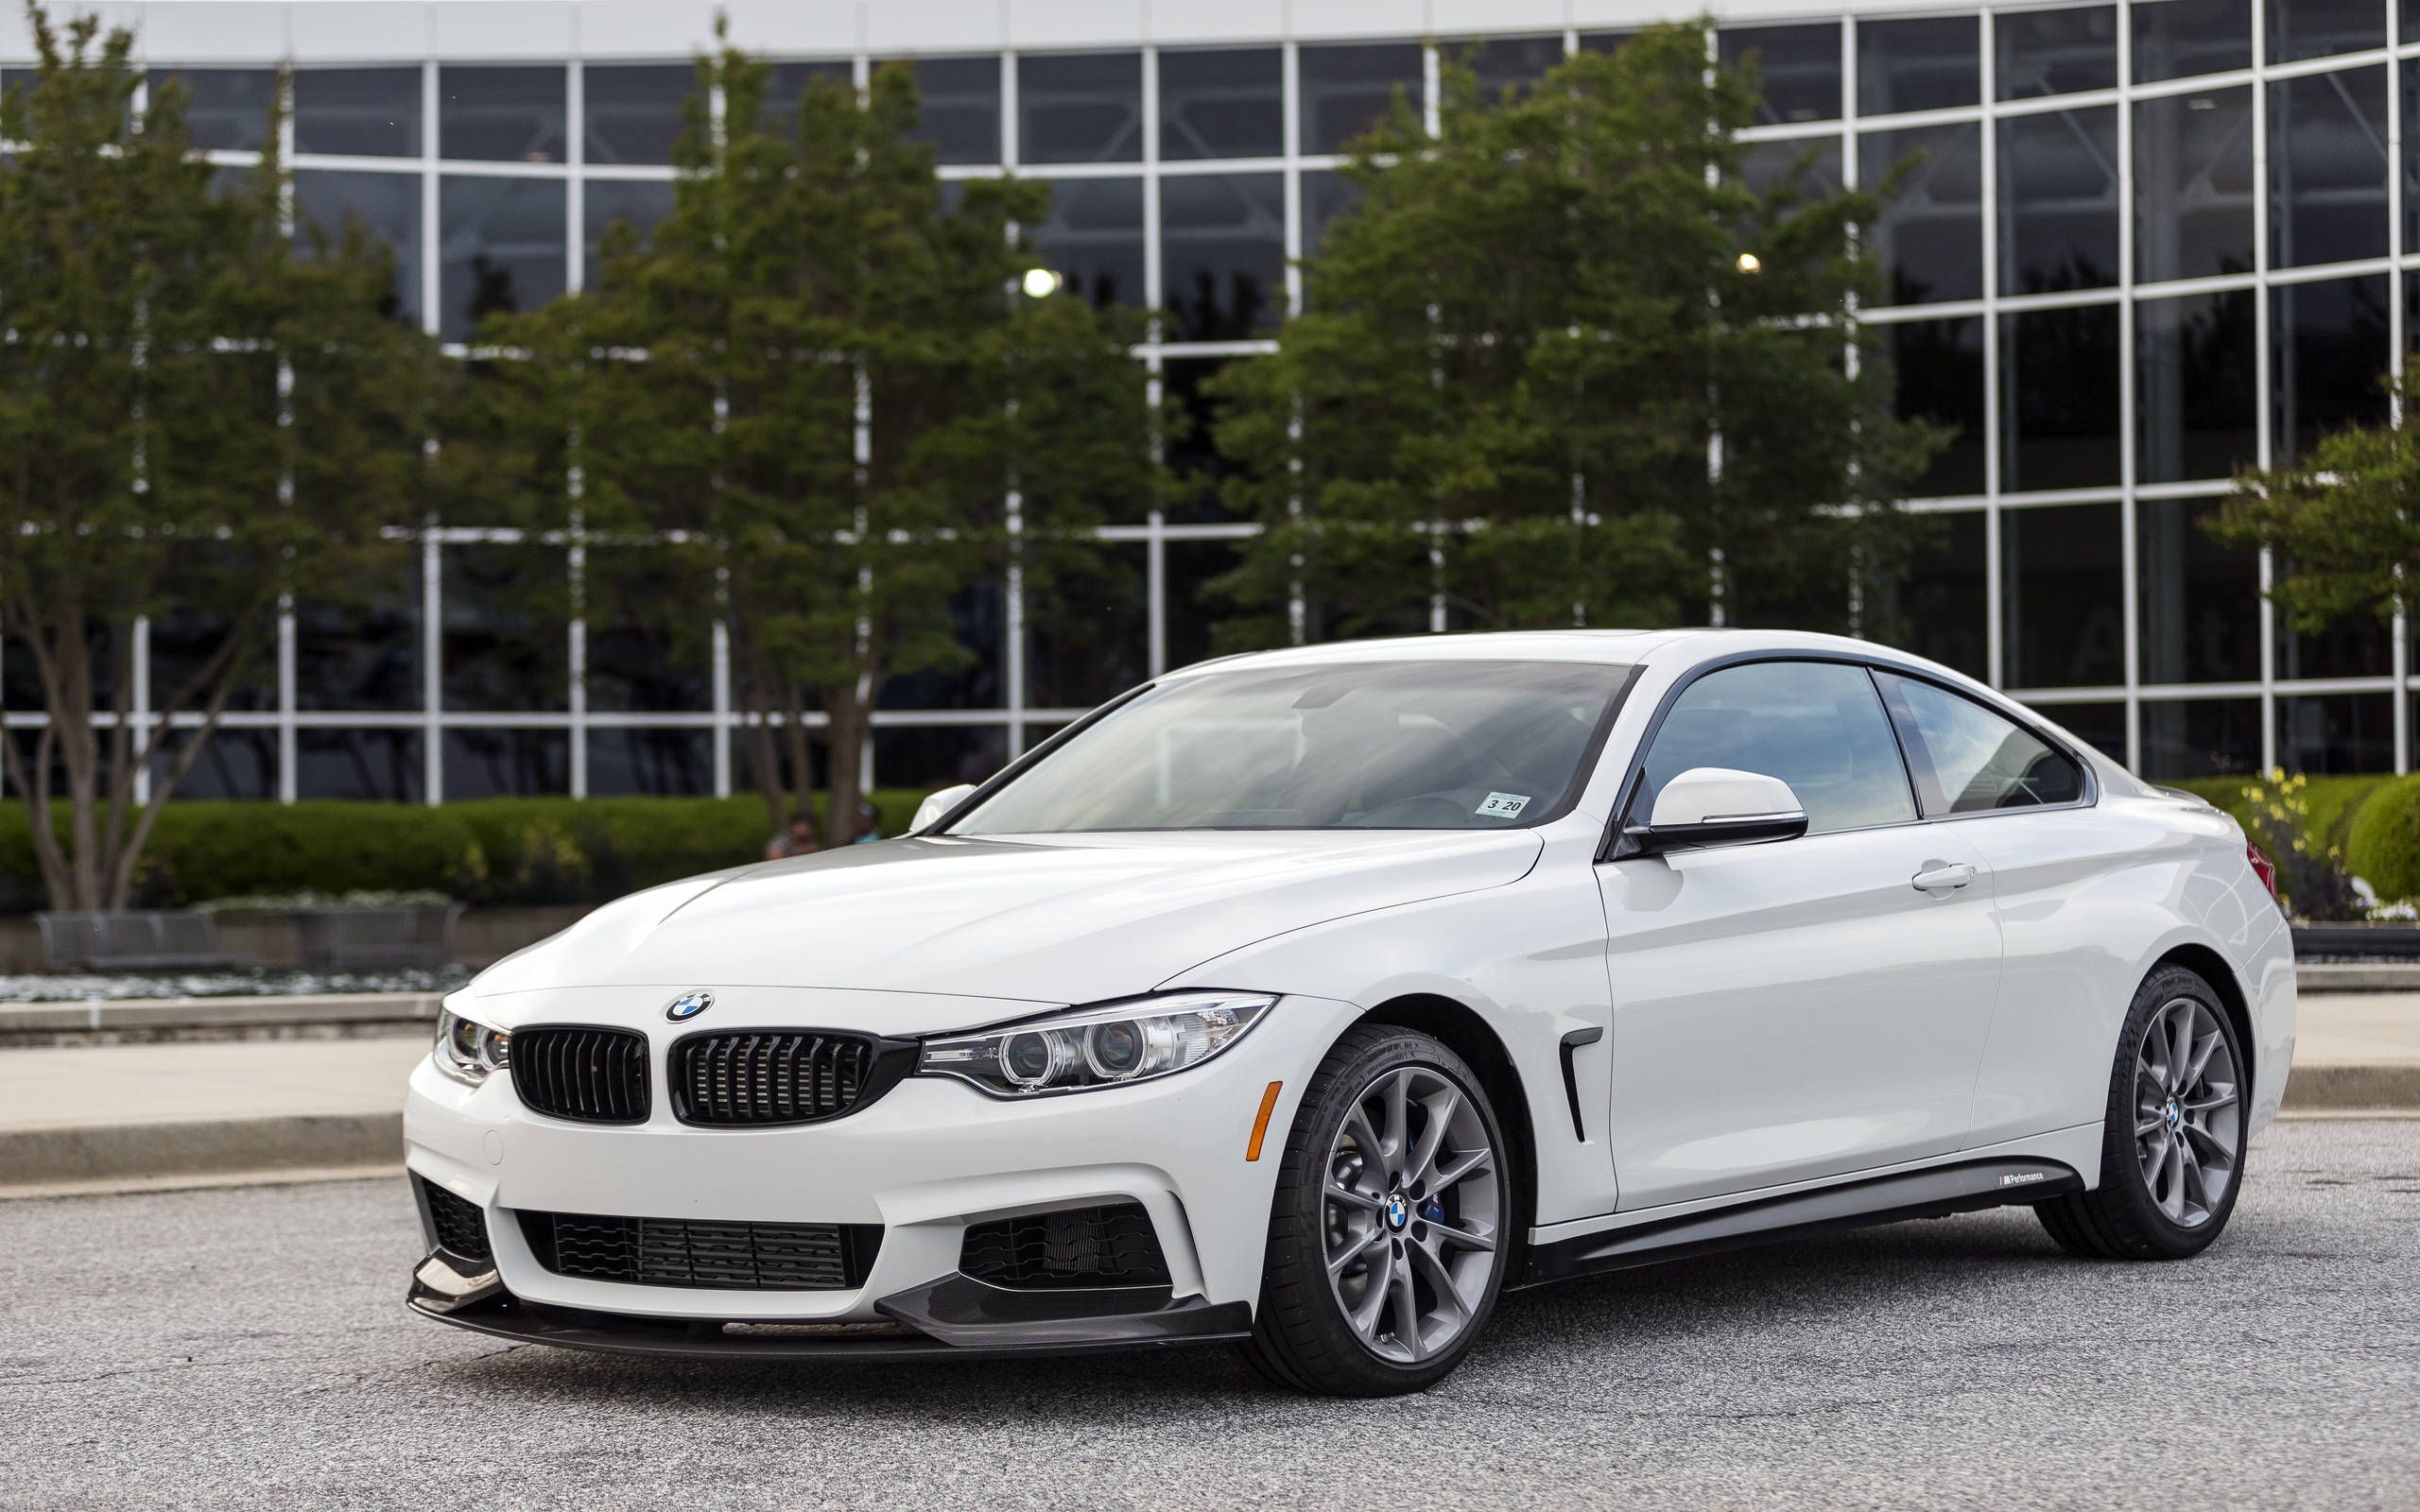 2016 BMW ZHP 435i is a diet M coupe